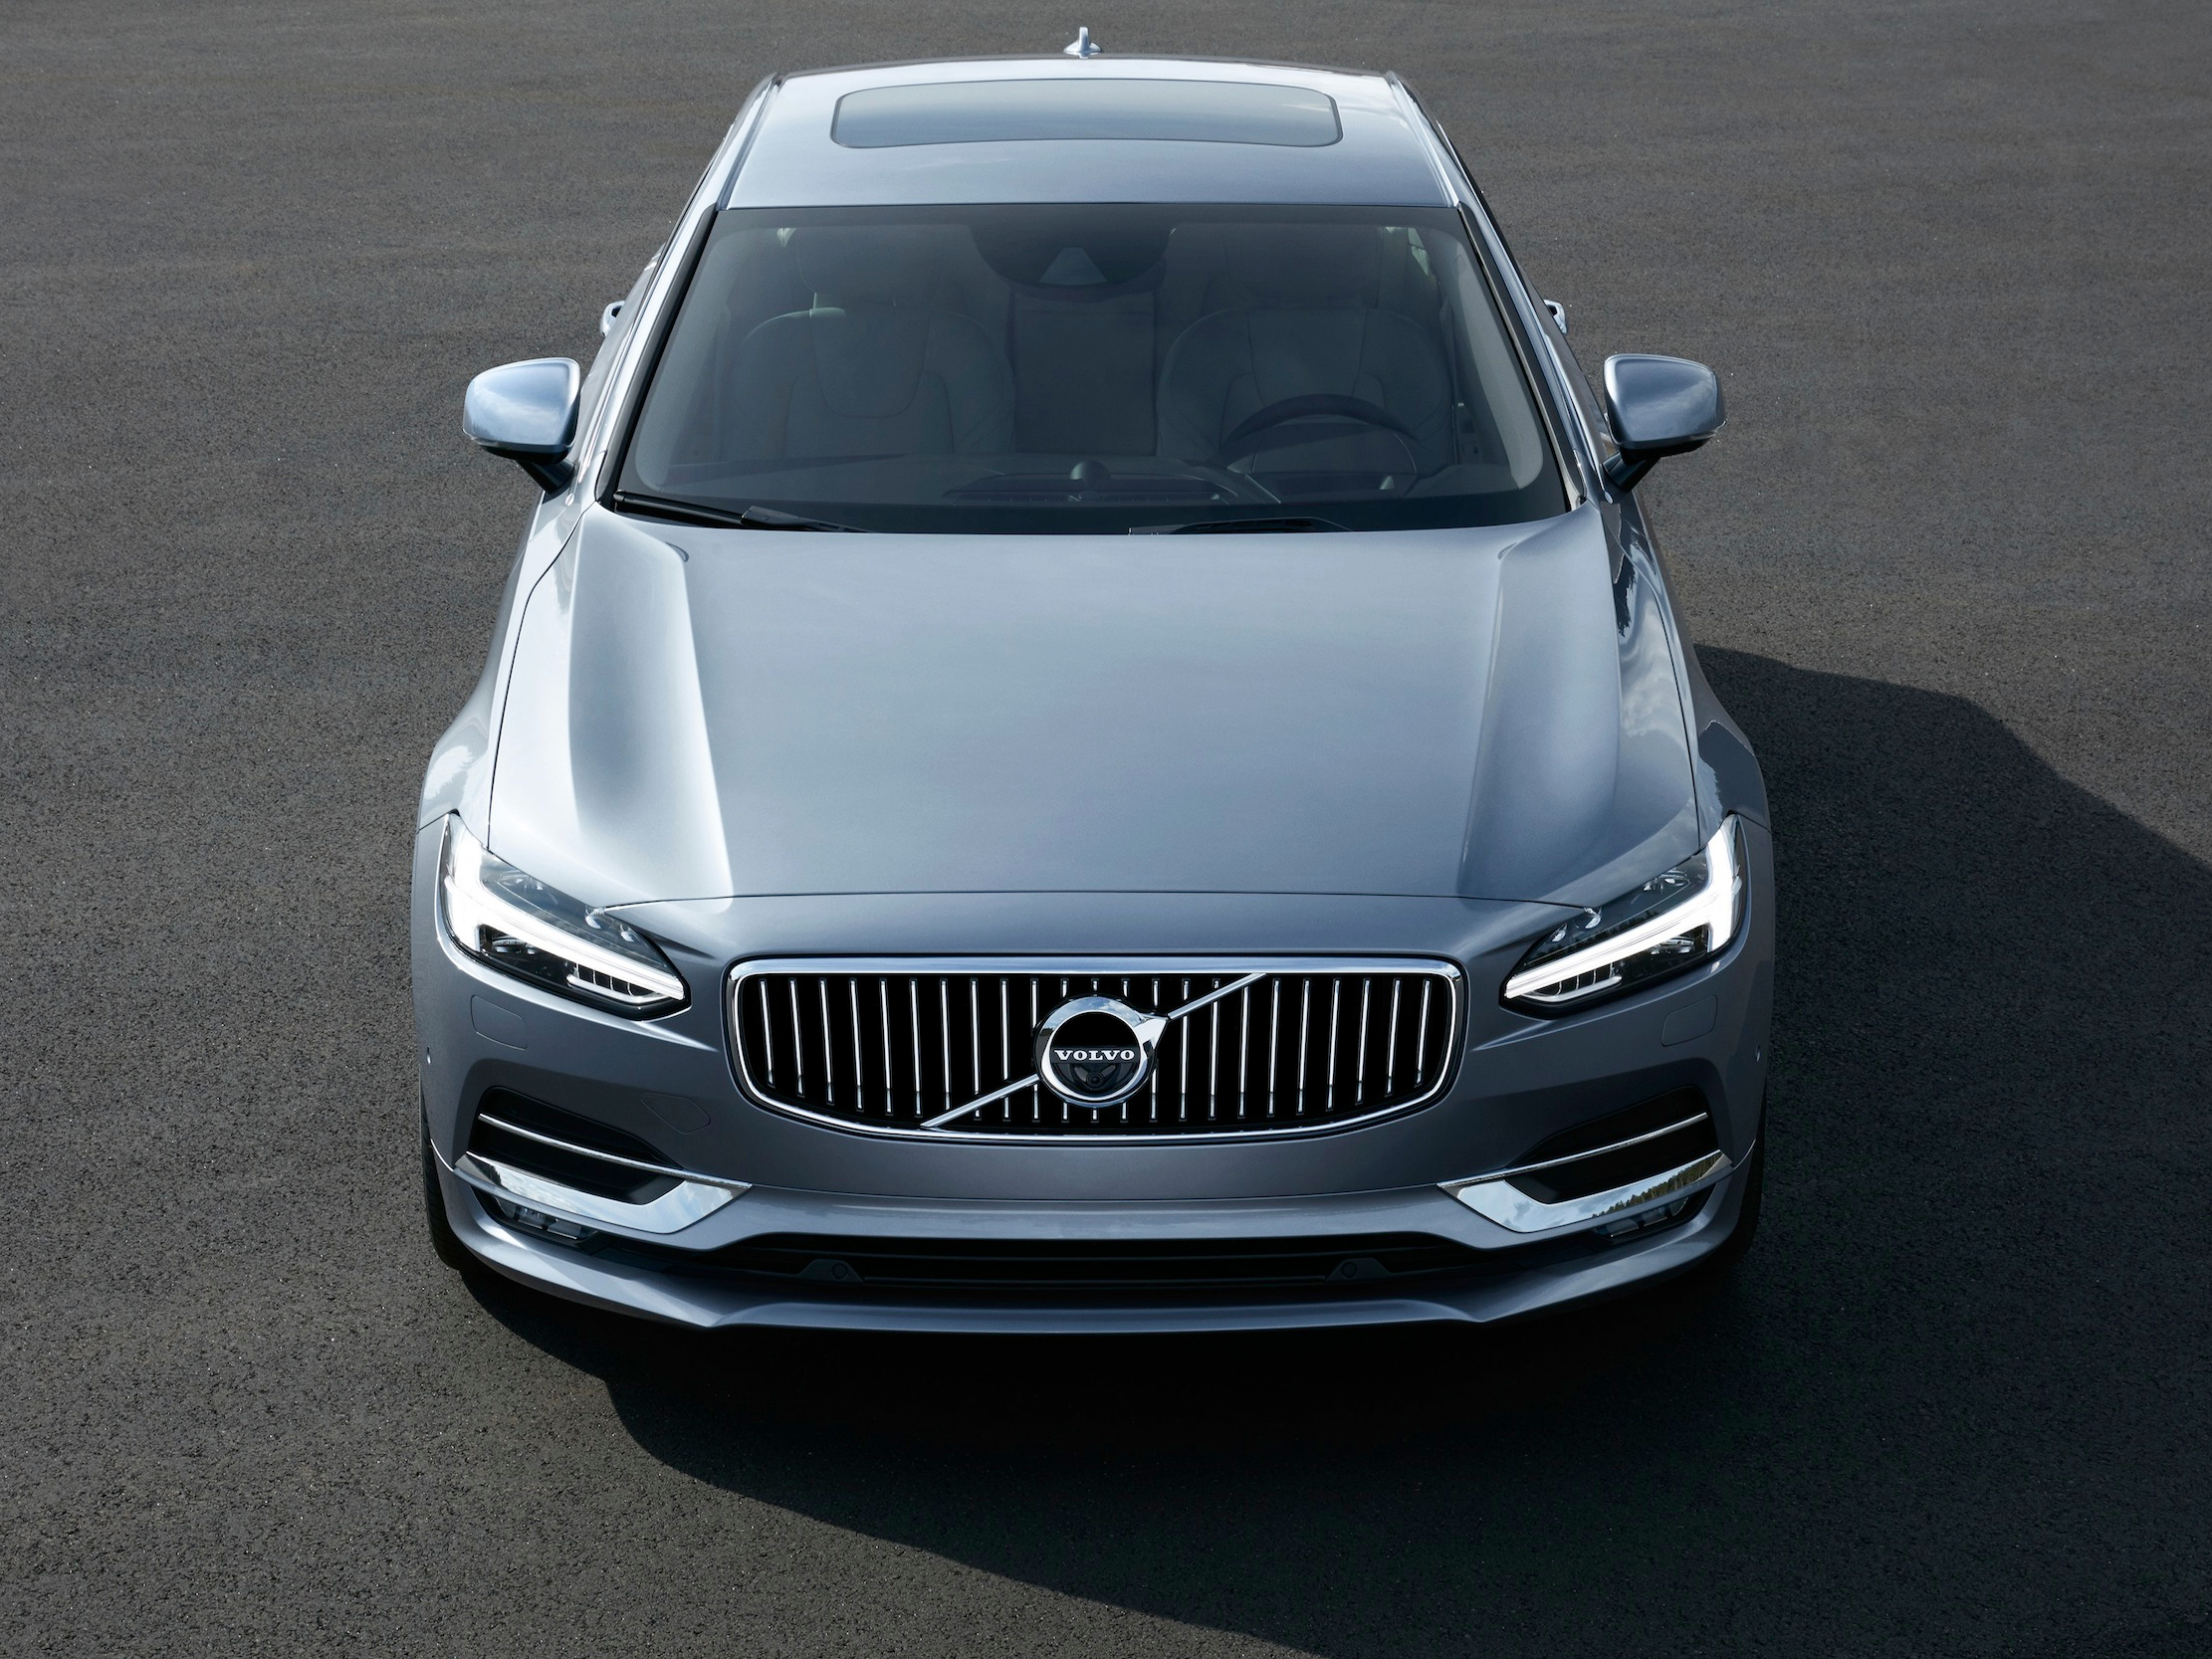 Images of Volvo S90 | 2222x1667